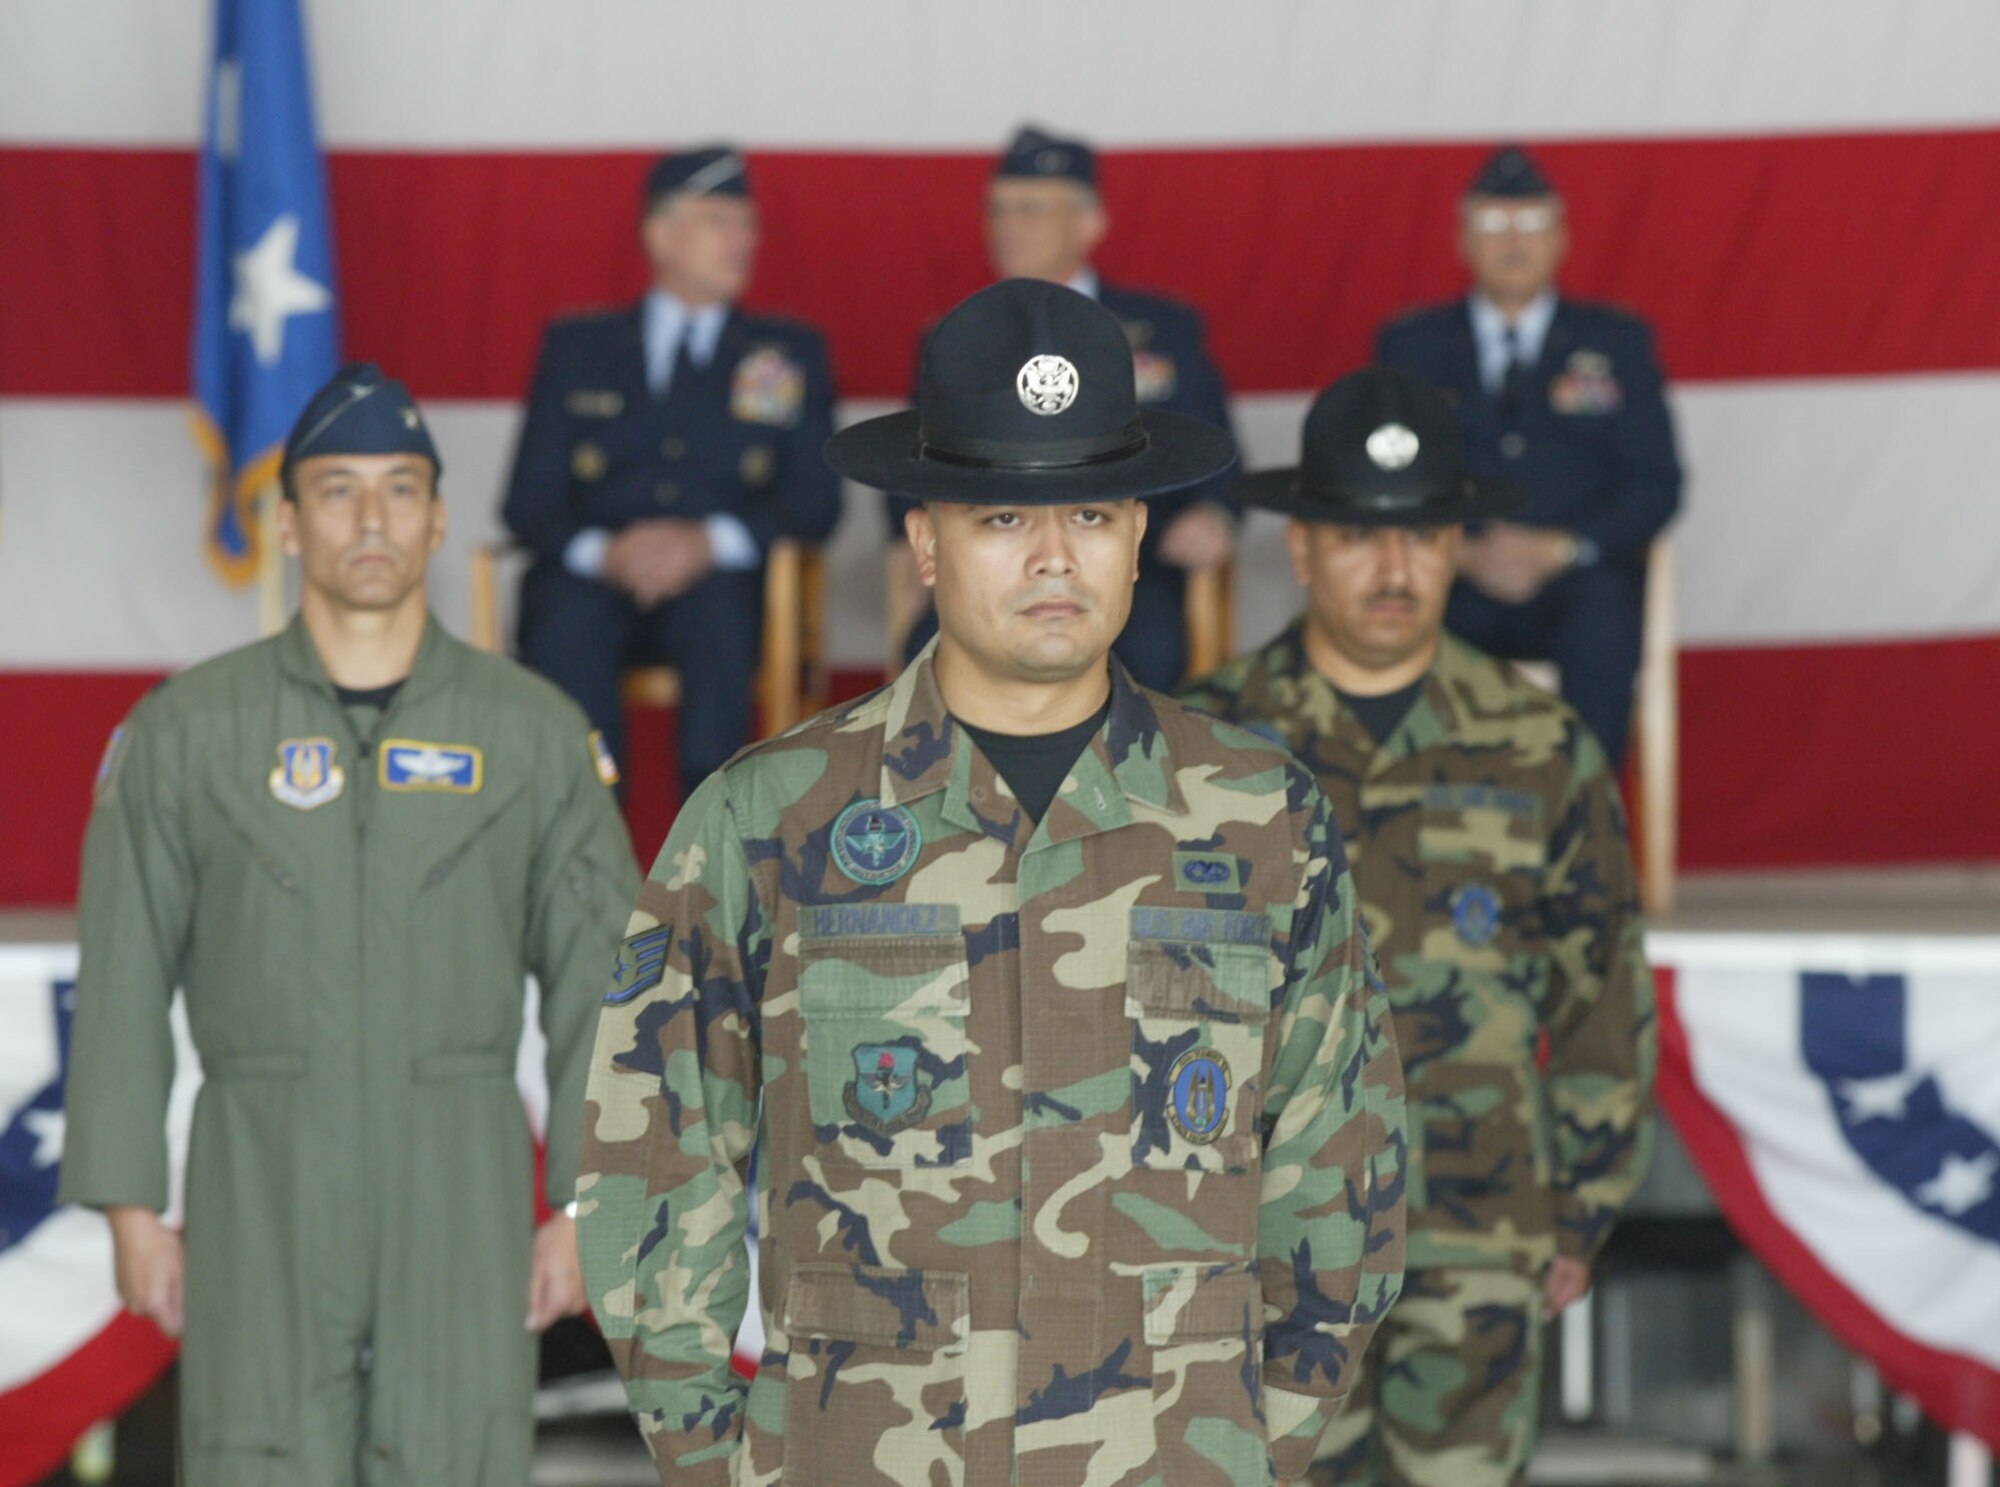 From the left, Col. Mike Kim, vice commander of 22nd Air Force and commander of the troops, along with training instructors from the 37th Training Wing, Lackland Air Force Base, Texas, await the next command for the troop formations at the Change of Command ceremony.